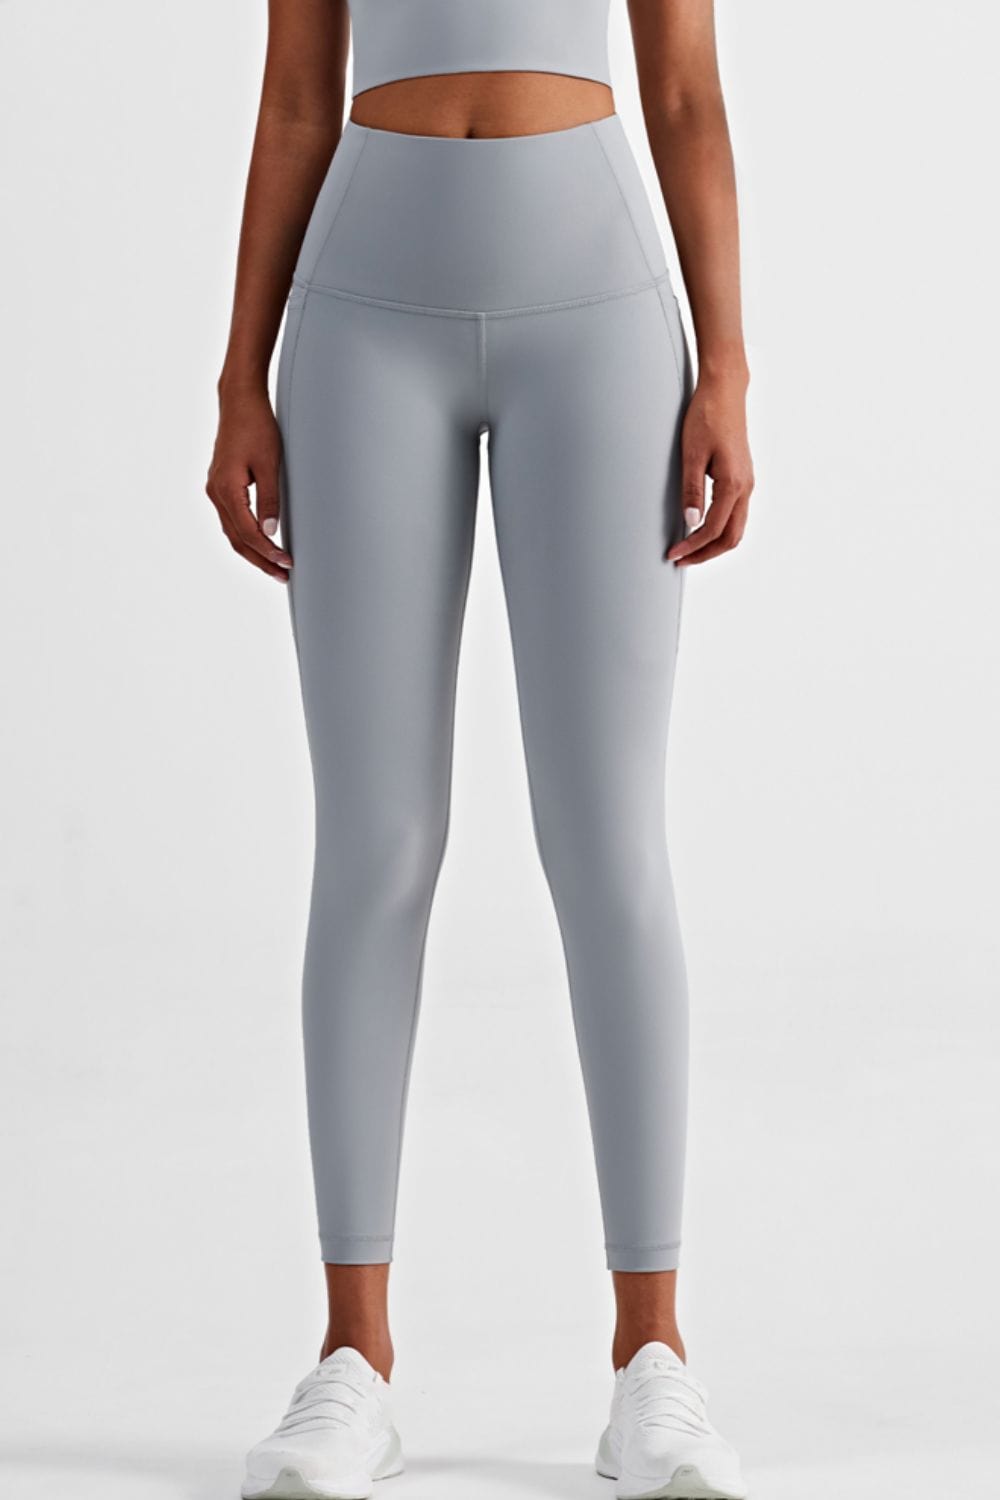 Wide Waistband Sports Leggings with Side Pockets - Runway Frenzy 